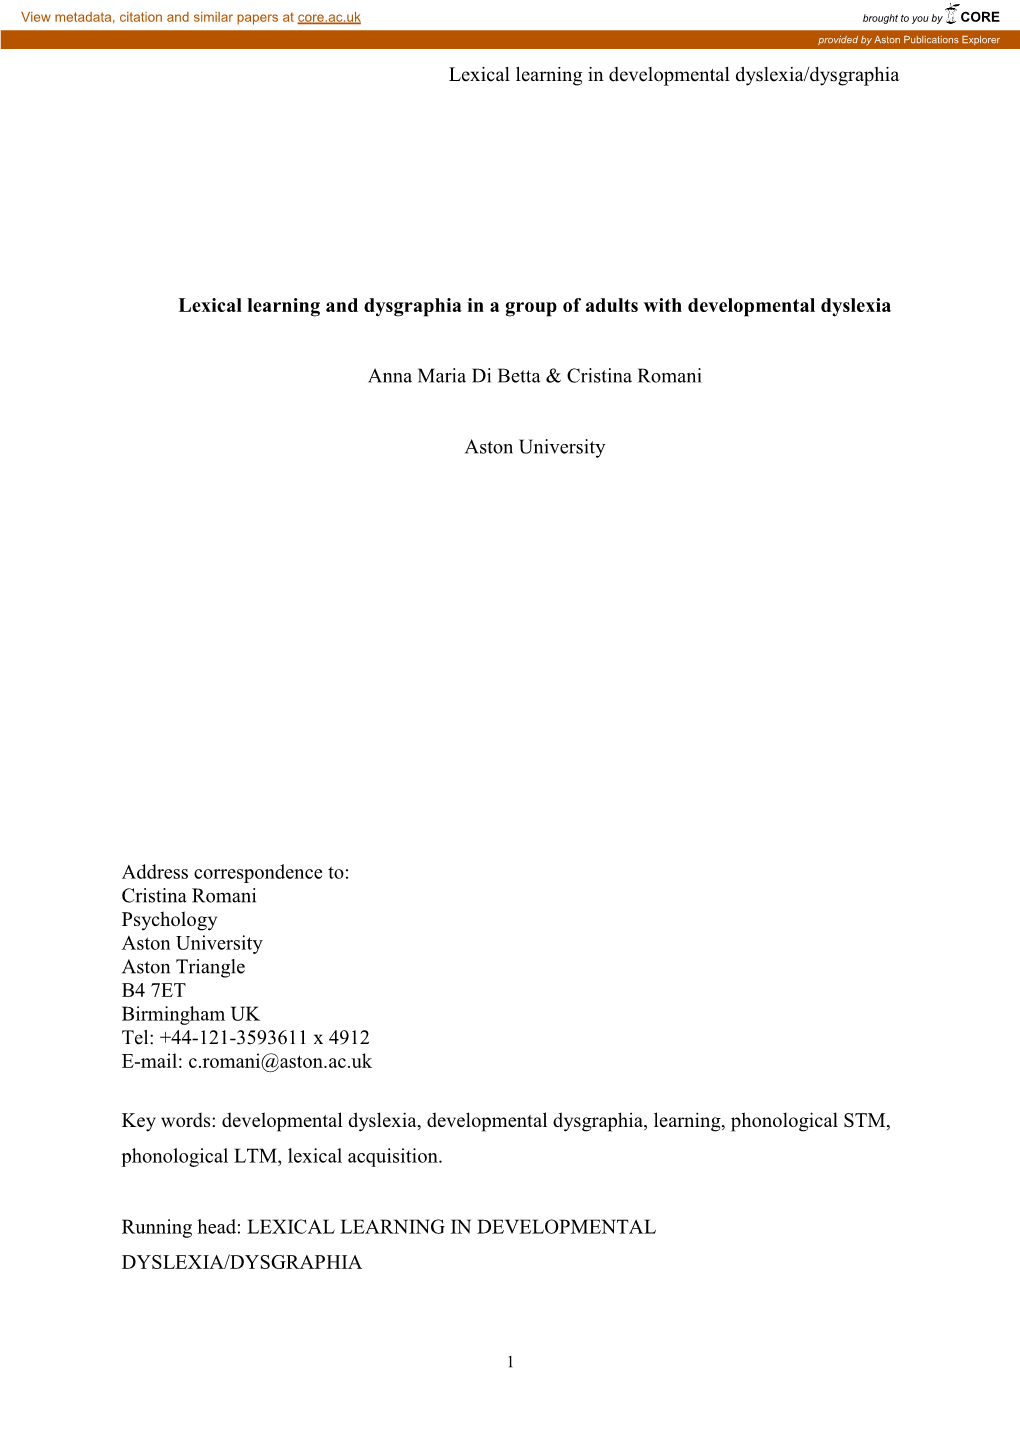 Lexical Learning and Dysgraphia in a Group of Adults with Developmental Dyslexia